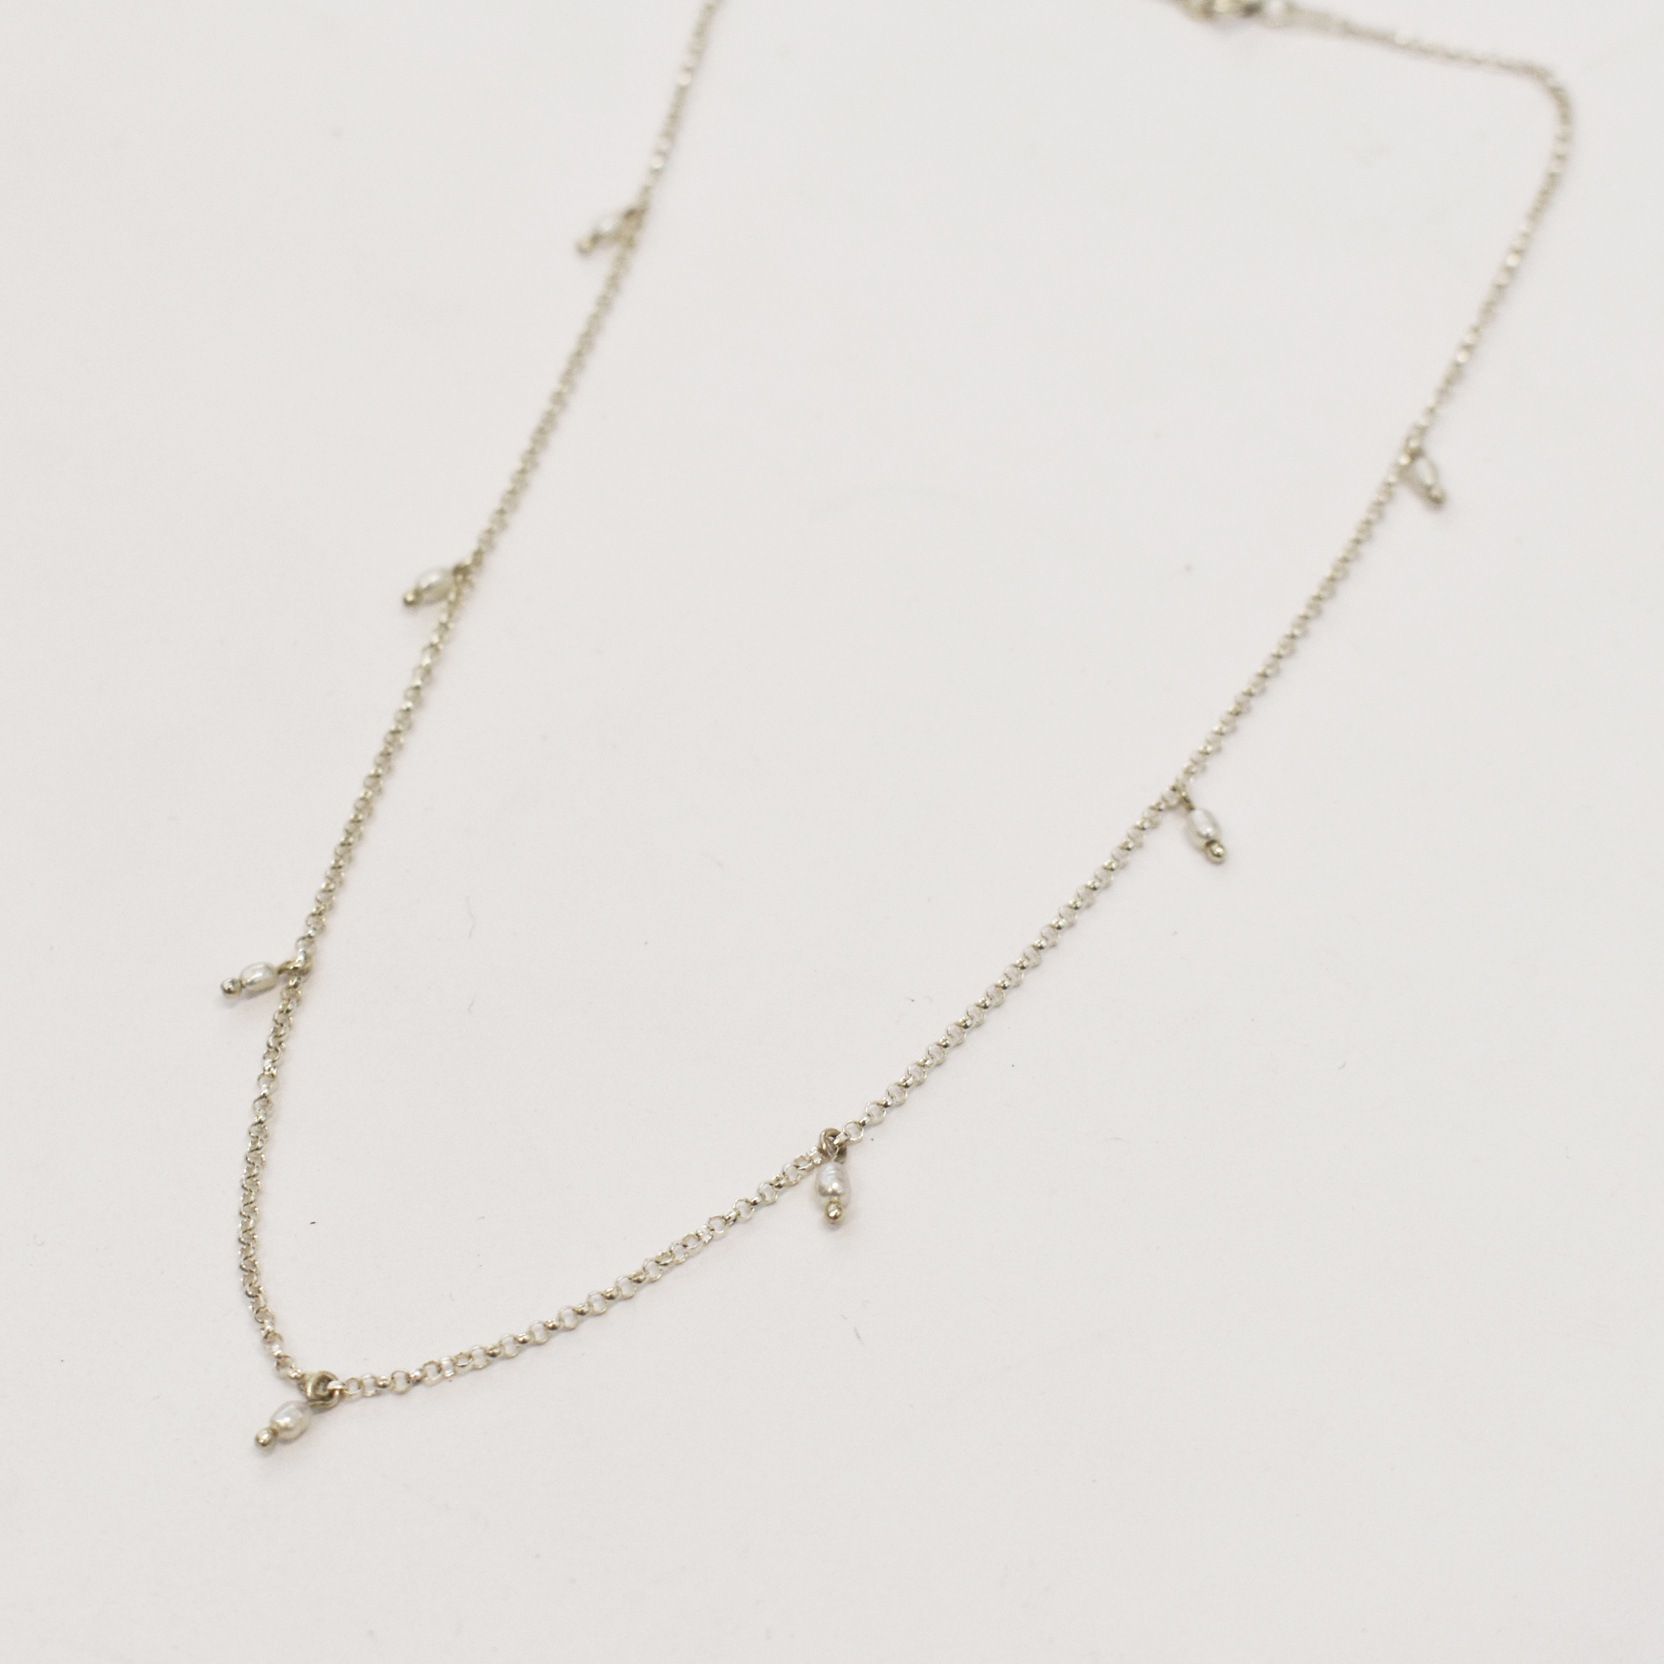 Silver Pearly Charm Necklace